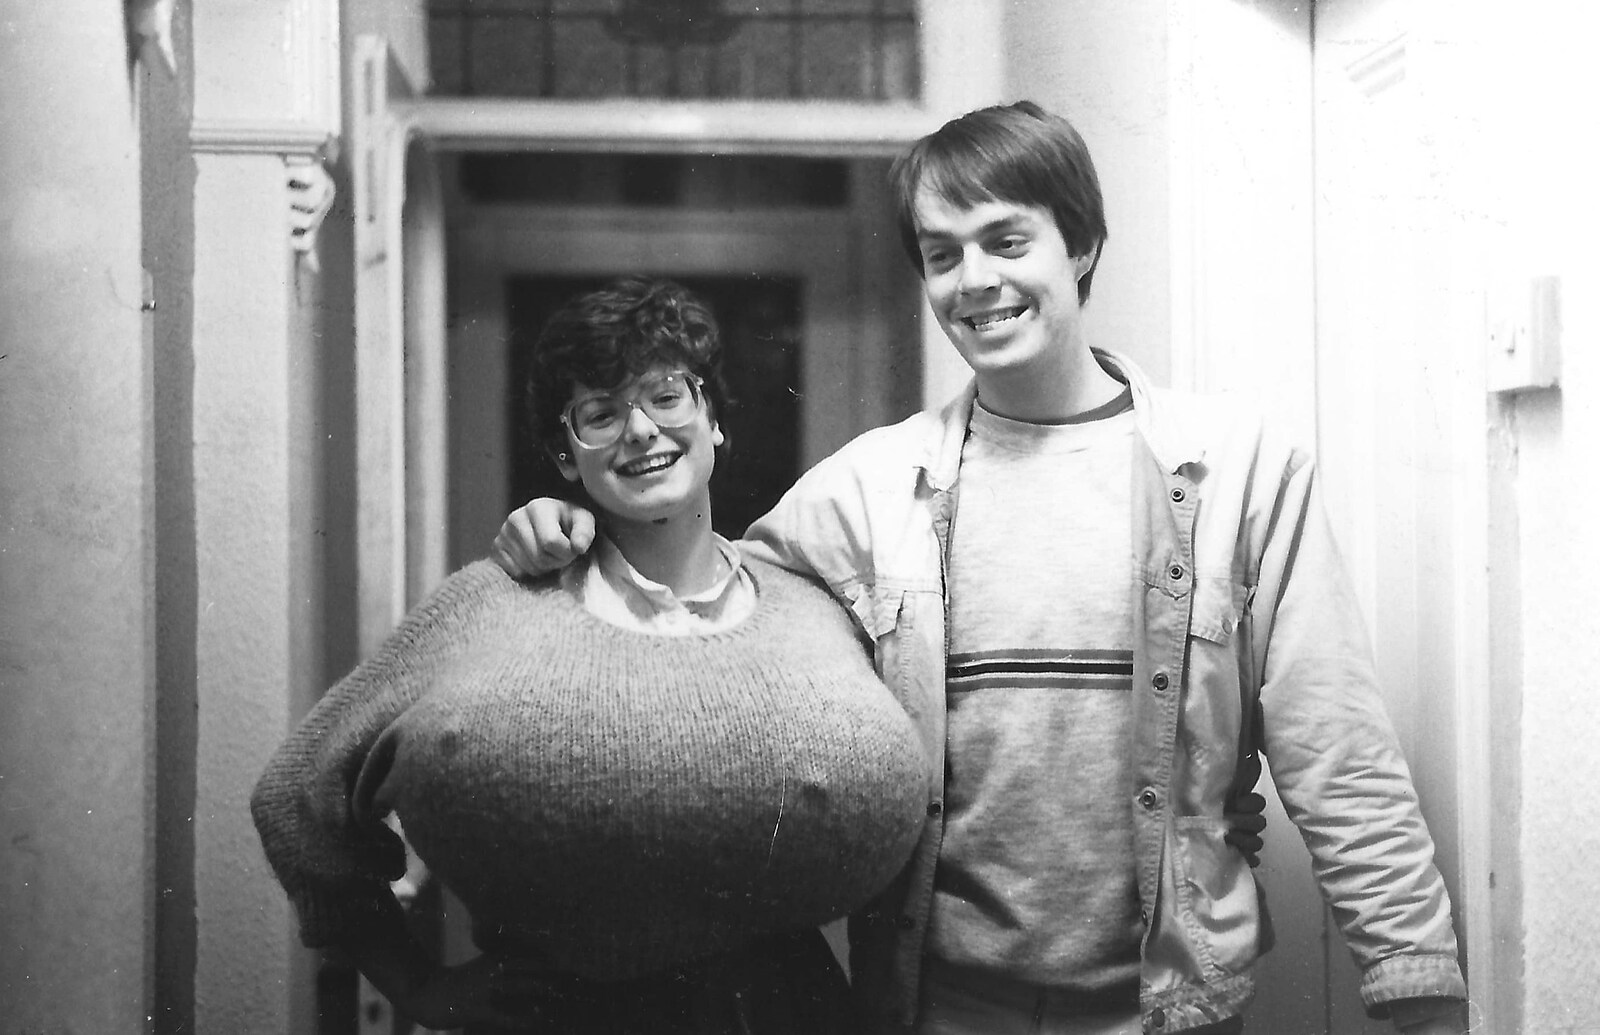 Barbara's got massive balloon breasts from Uni: The First Year in Black and White, Plymouth Polytechnic, Devon - 8th April 1986